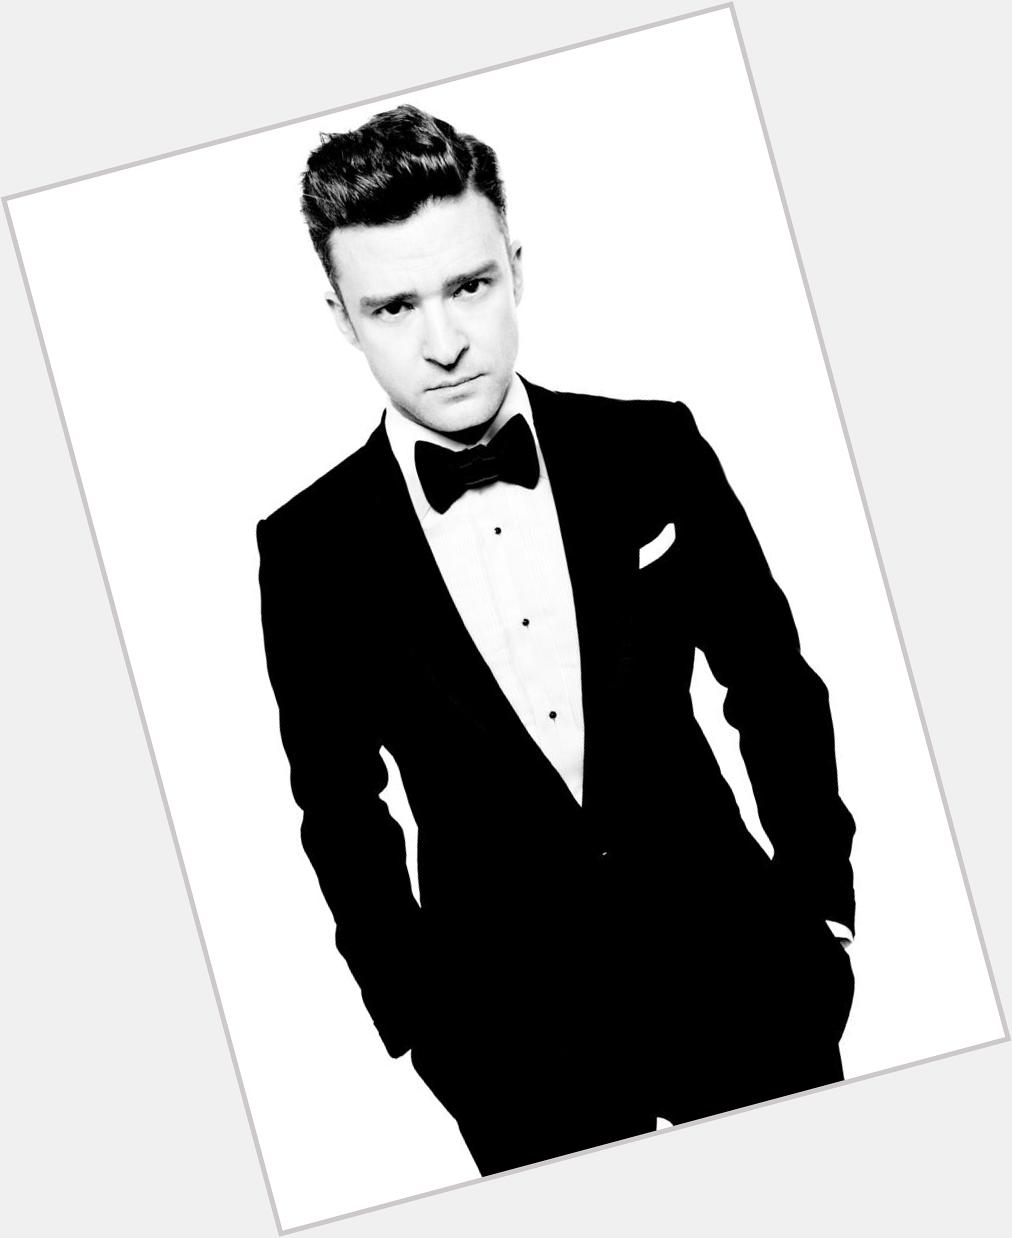 Happy 33rd Birthday to Famous Singer, Justin Timberlake! to wish him a happy birthday! 